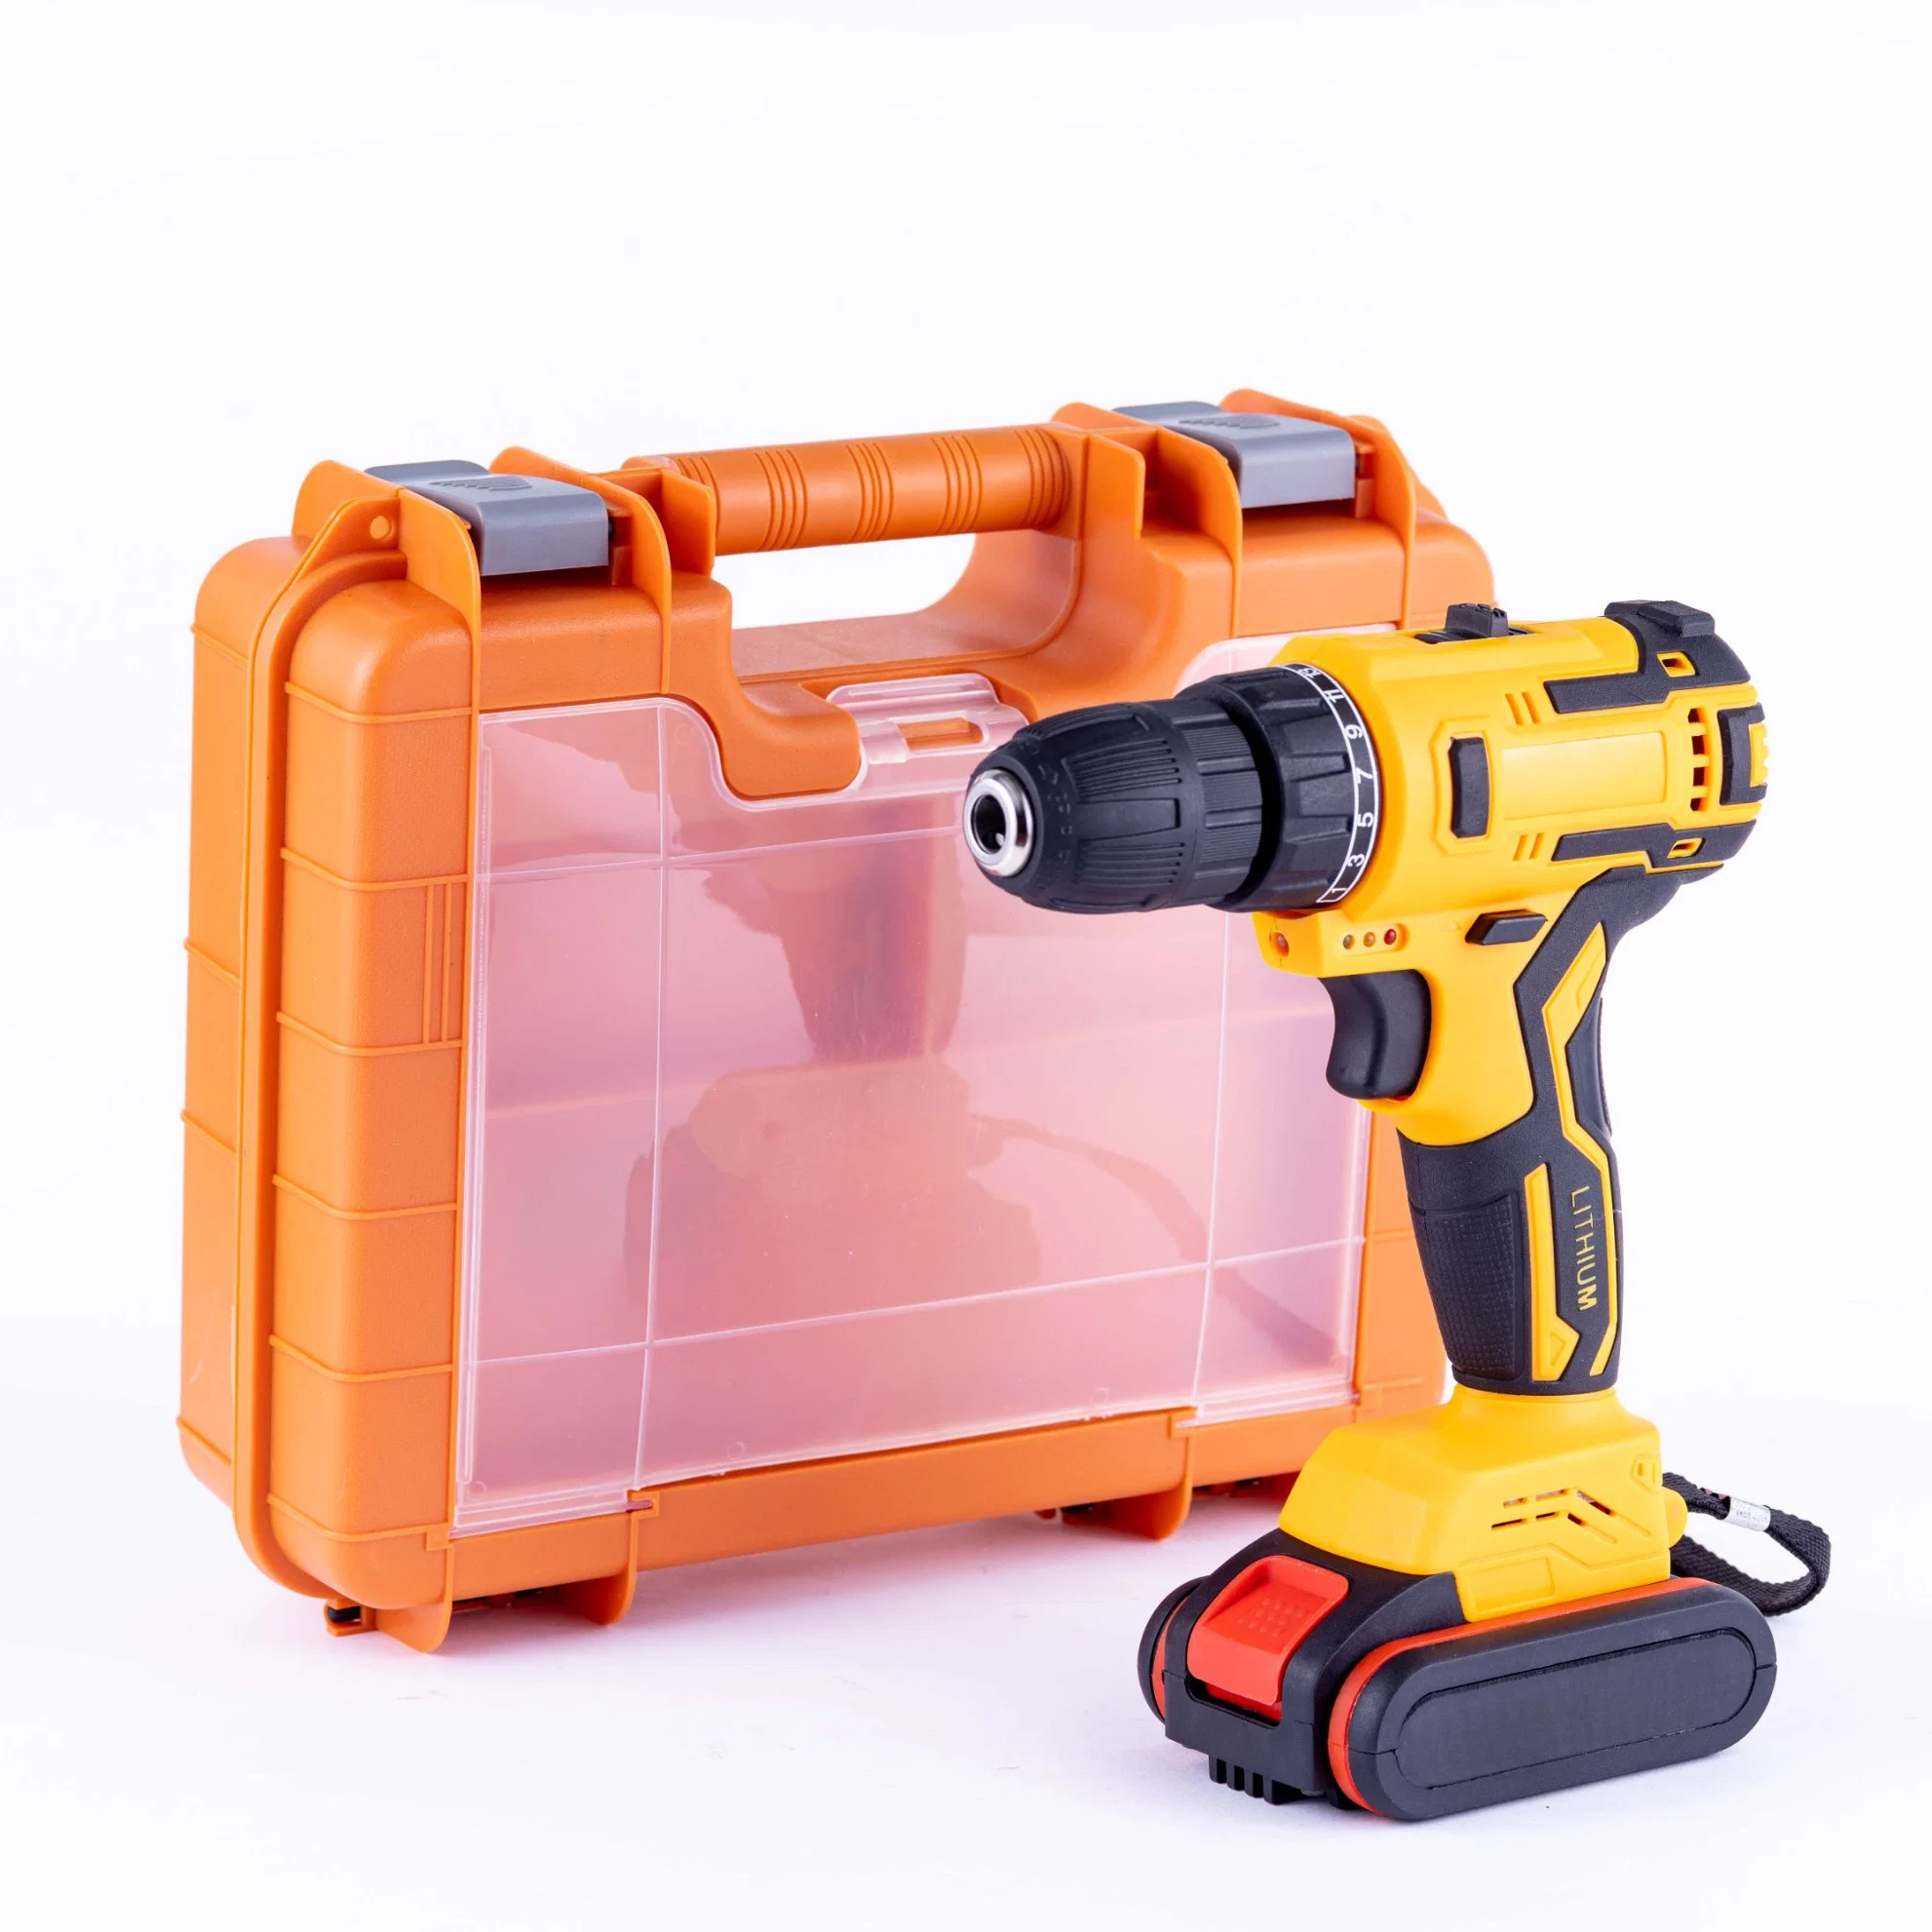 10% off 21V Impact Electric Cordless Brushless Compact Power Drill with 2-Speed Lithium-Ion Battery Drill Driver for Home Improvement DIY Screwdriver